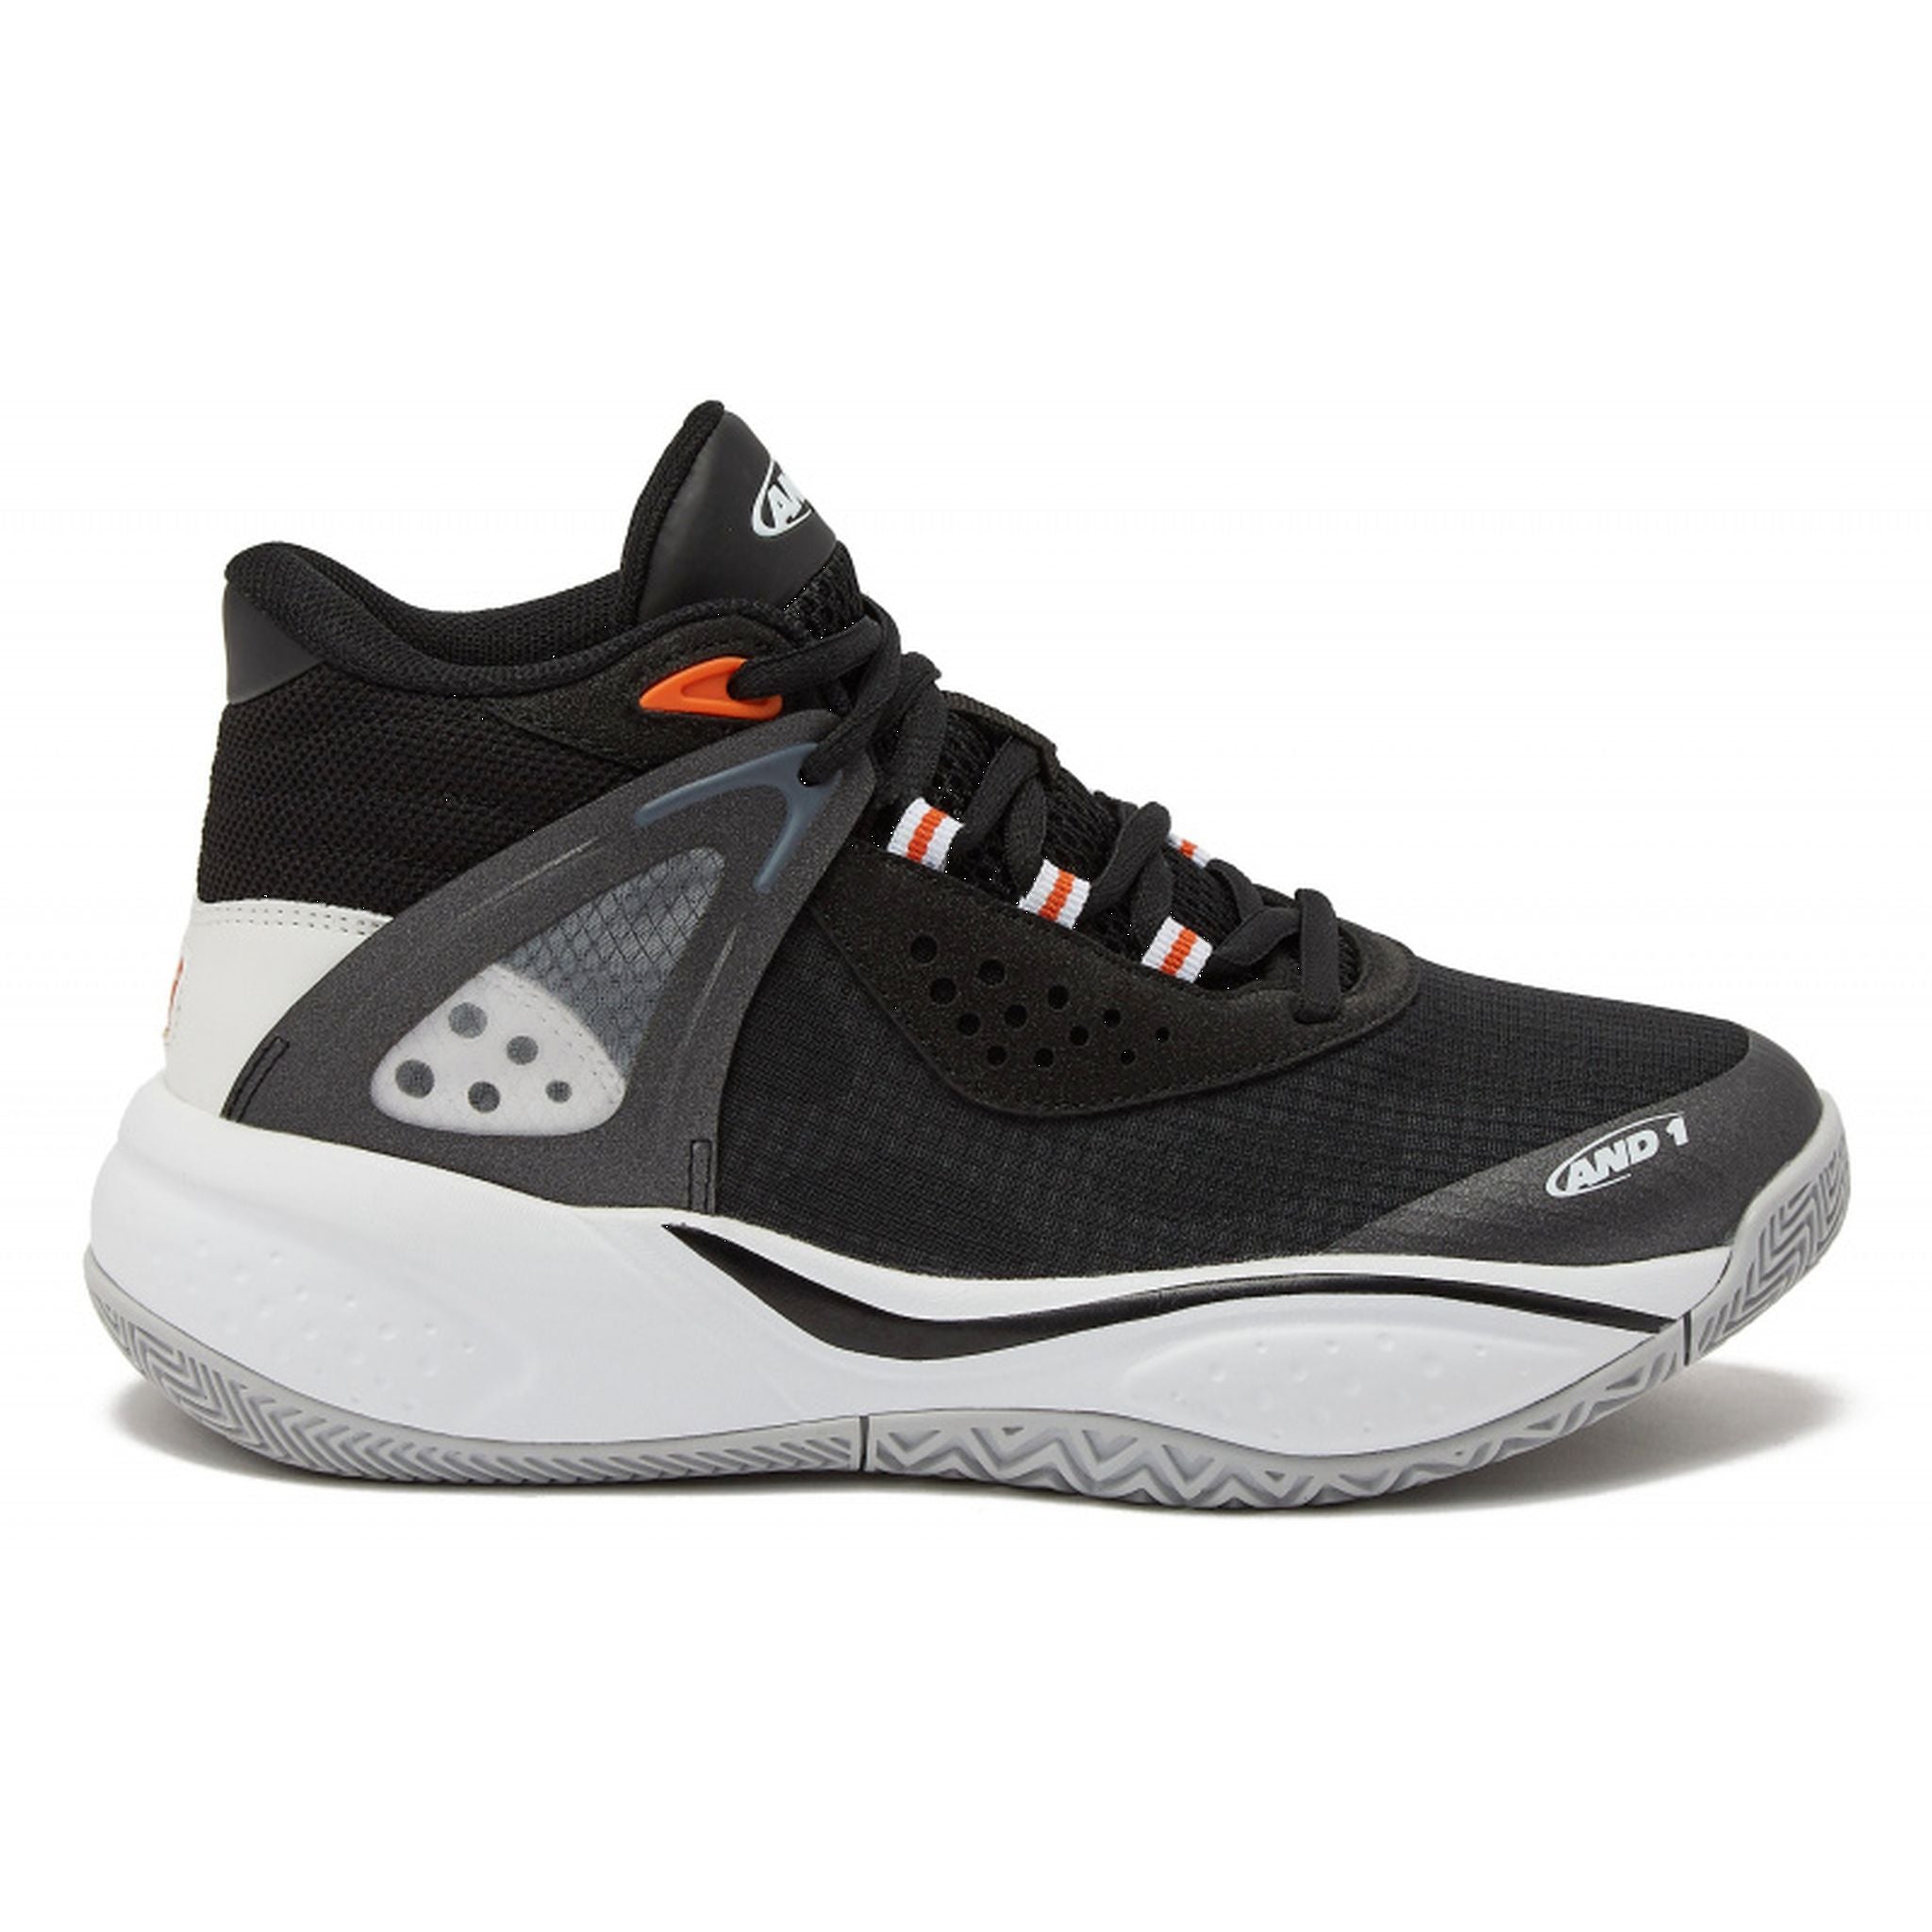 AND1 Revel Mid Adults Basketball Shoe